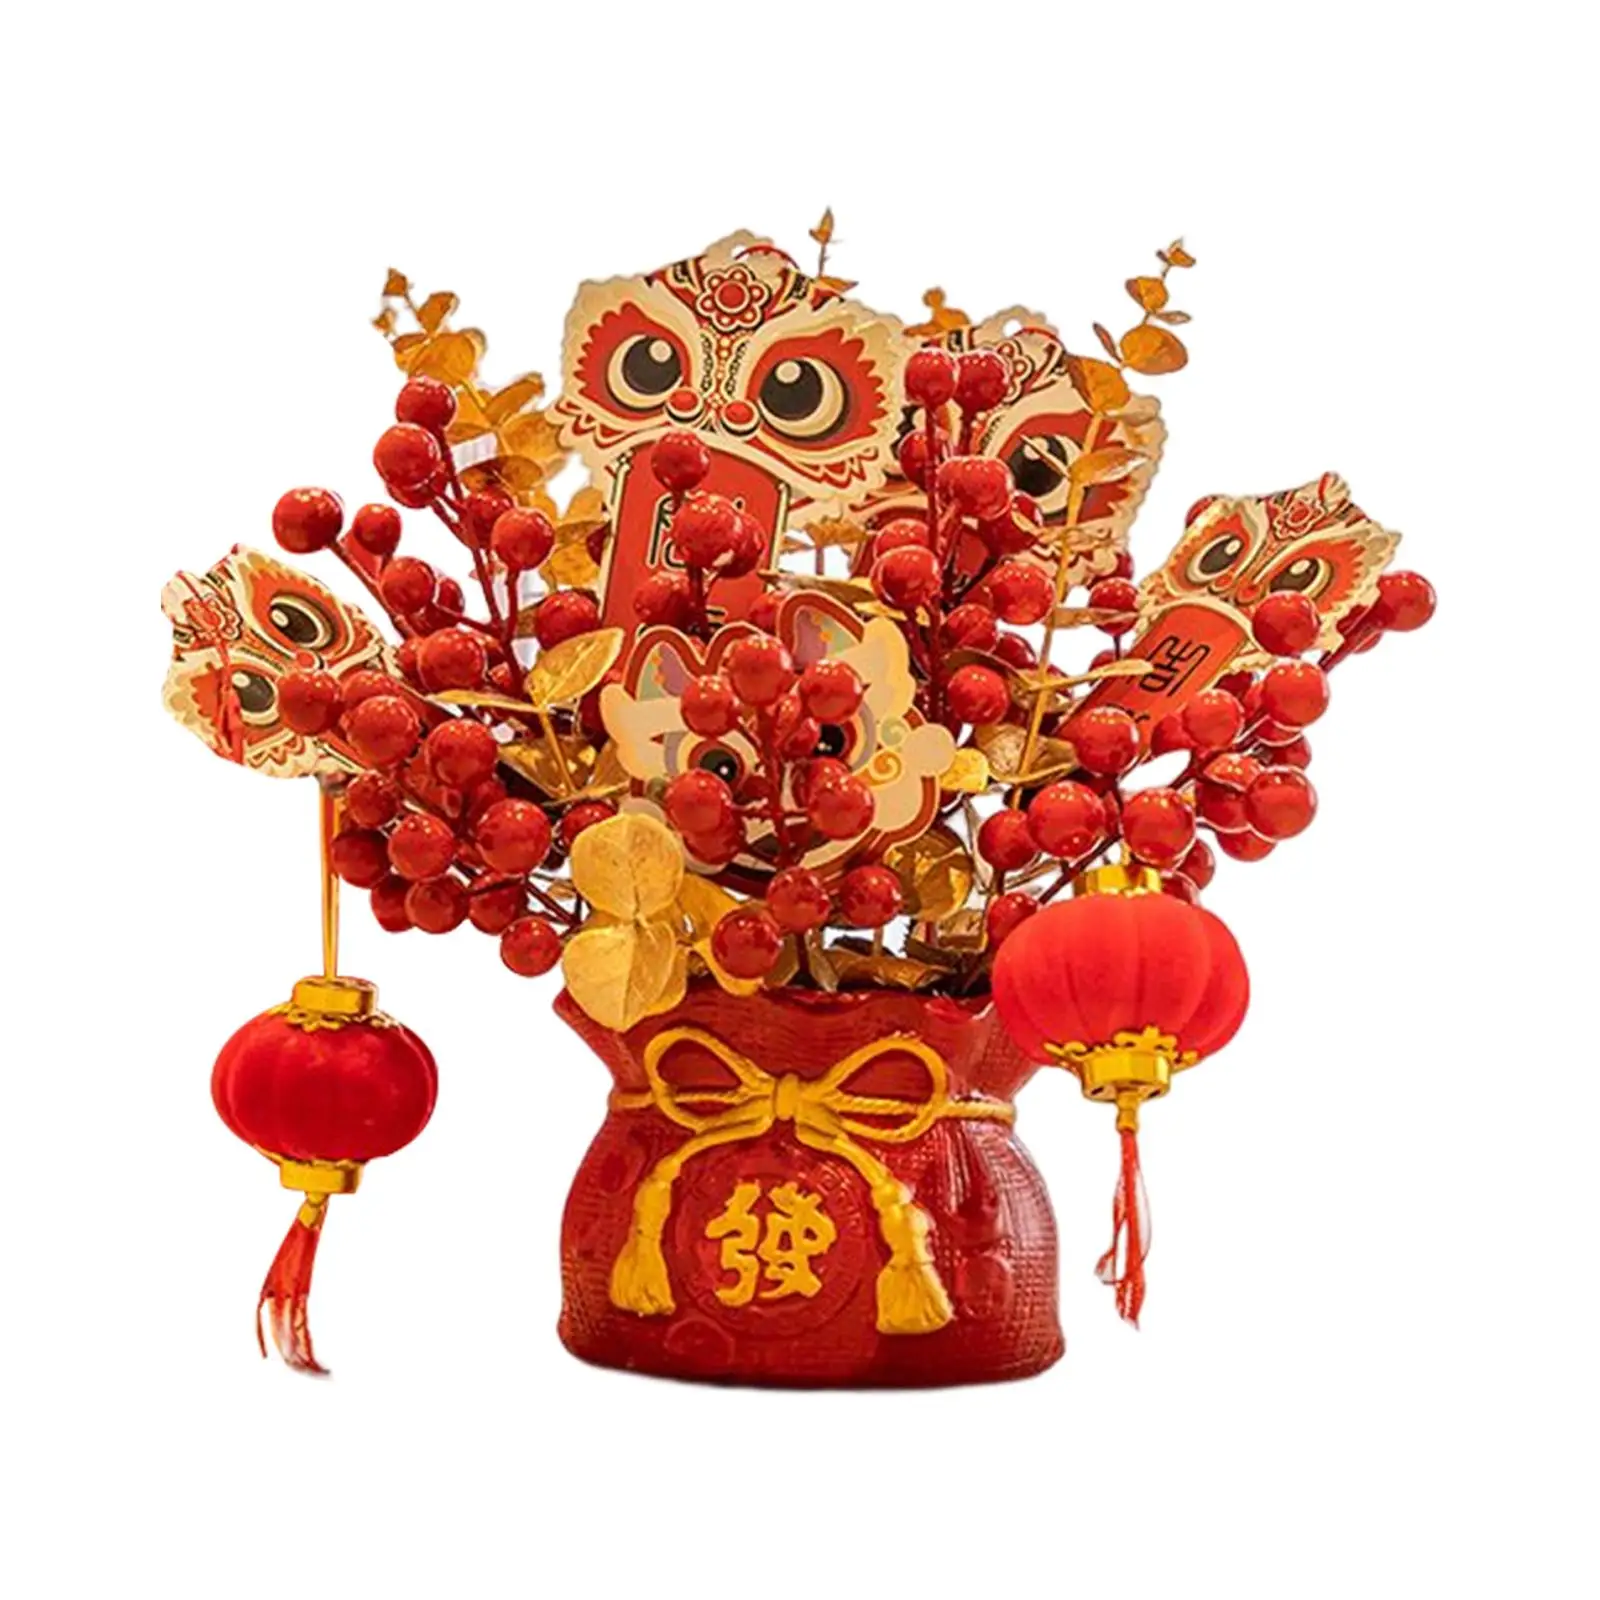 Artificial Potted Flower Table Centerpiece Planters Lion Lantern Ornaments Metal Eucalyptus Vase for Home Holiday Indoor Office